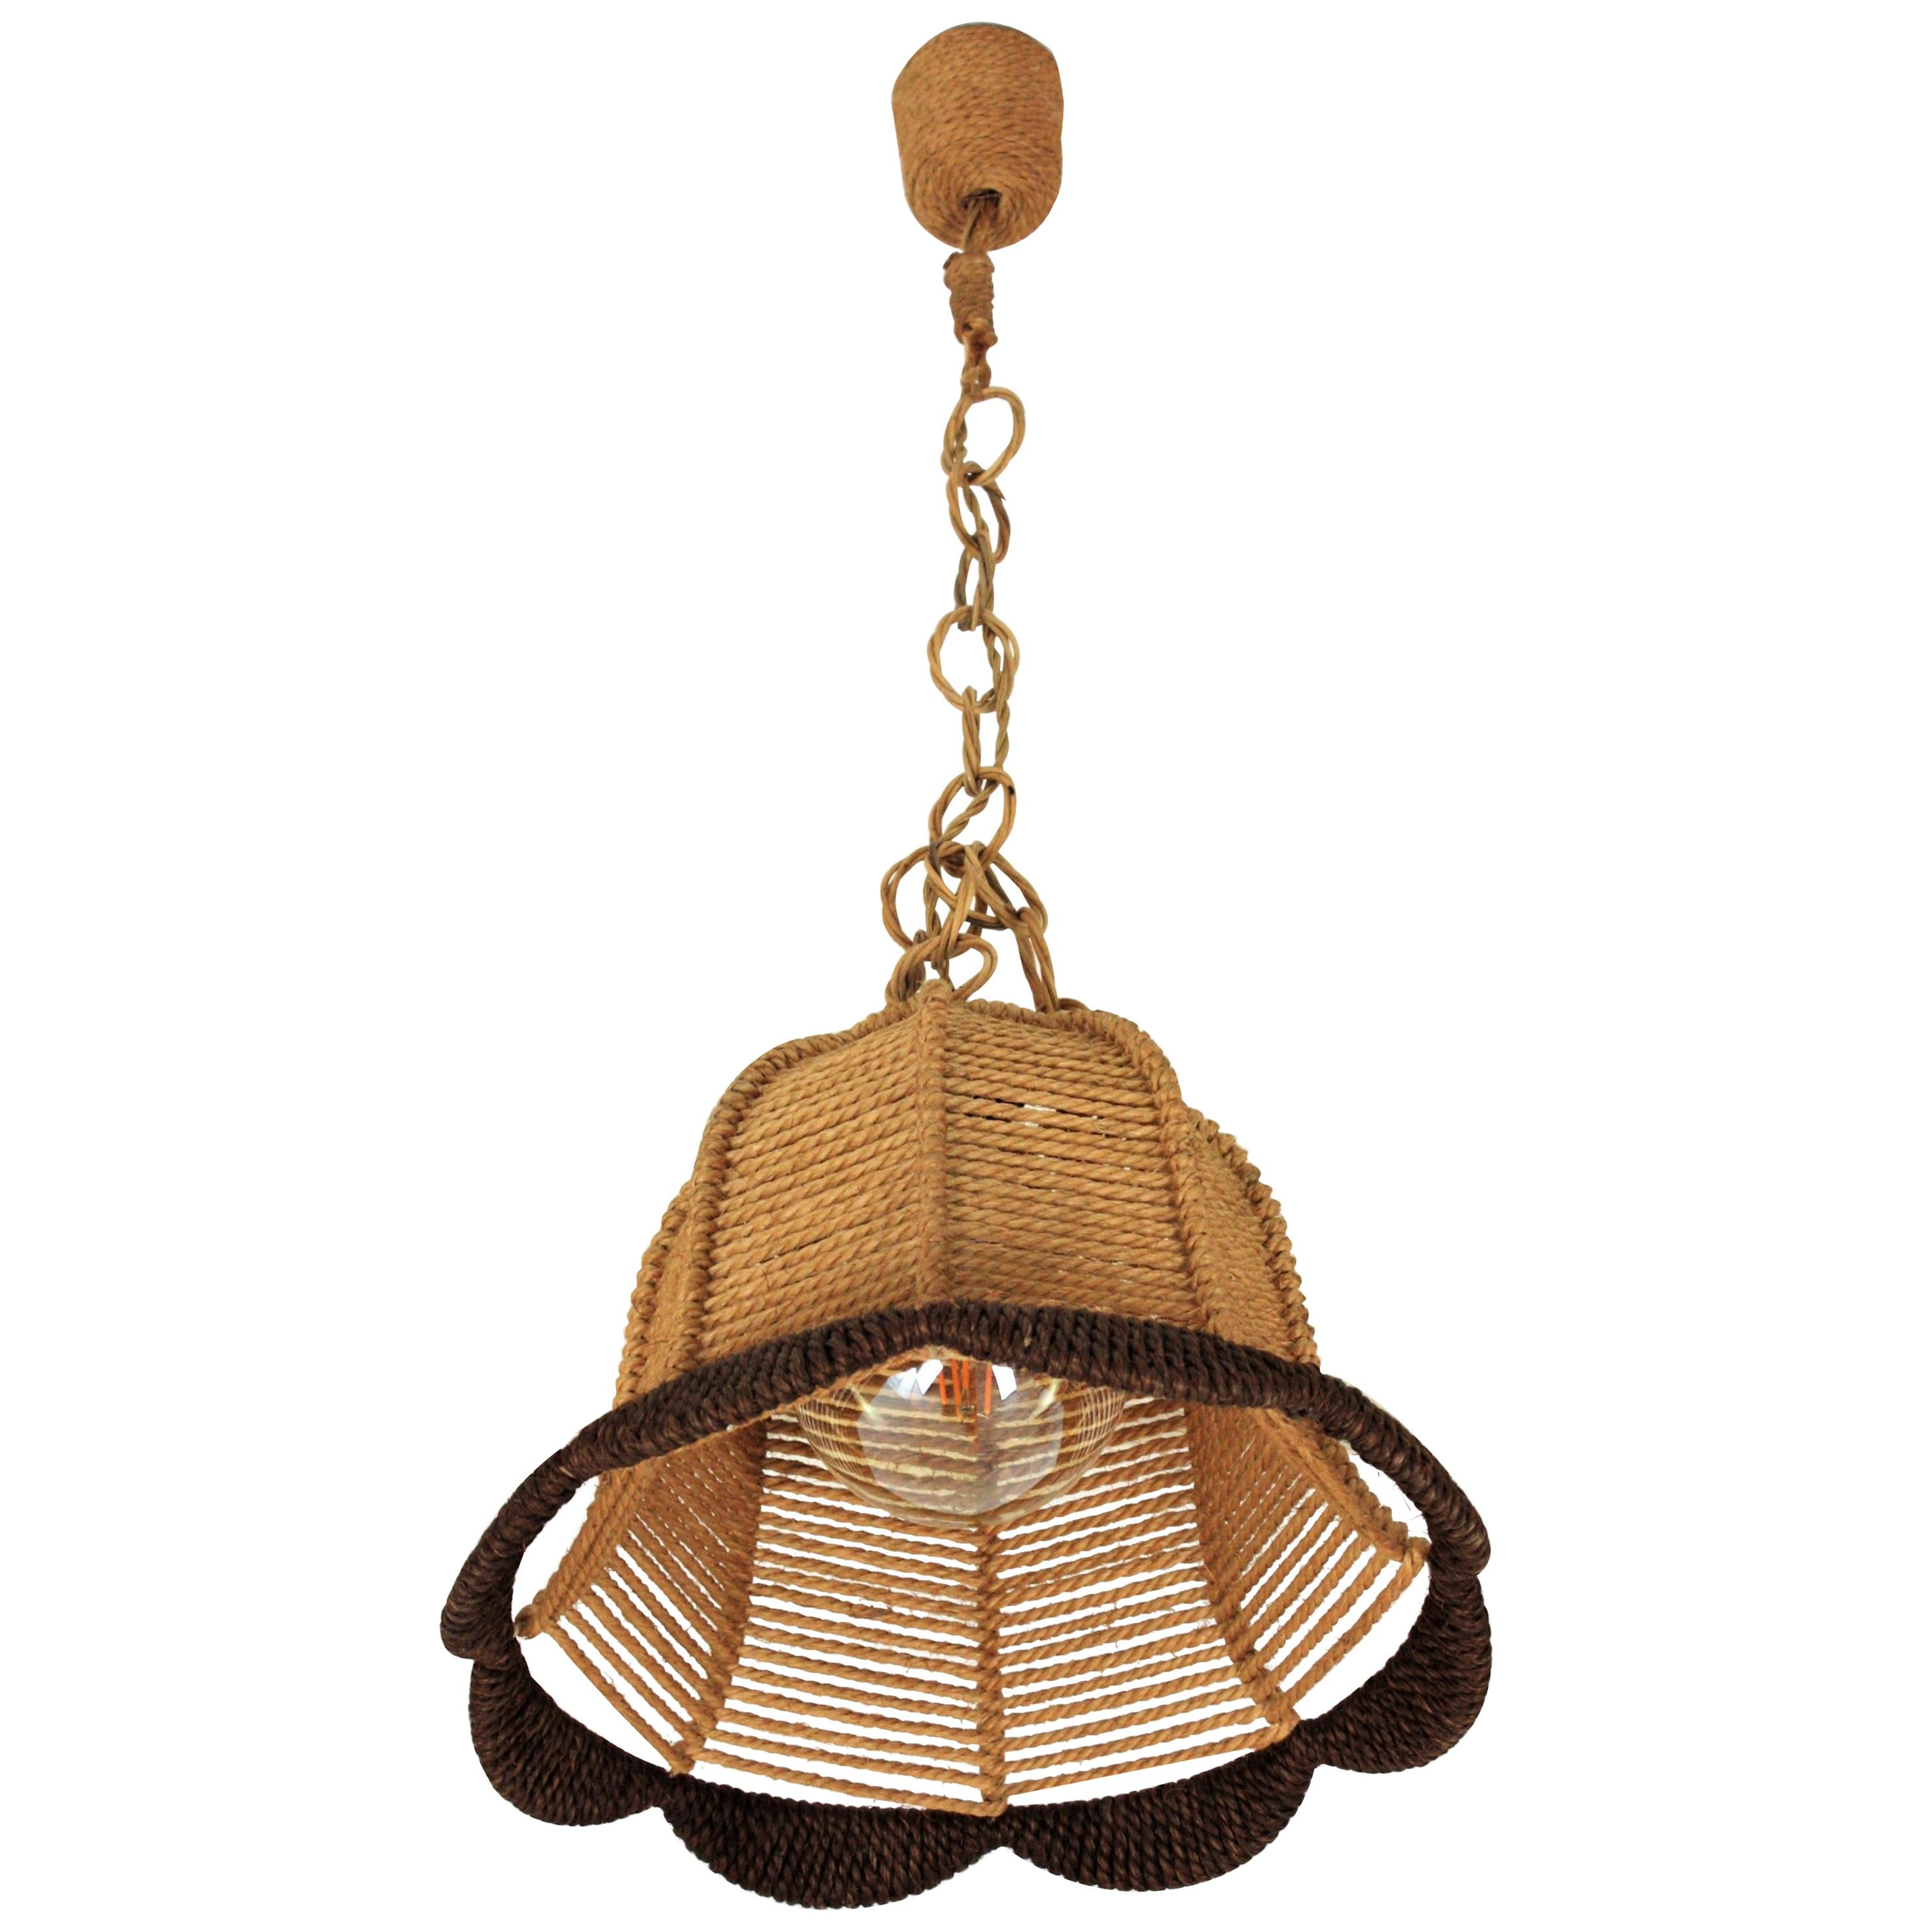 Rattan and Rope Bell Ceiling Pendant Light Hanging Lamp, Spain, 1960s